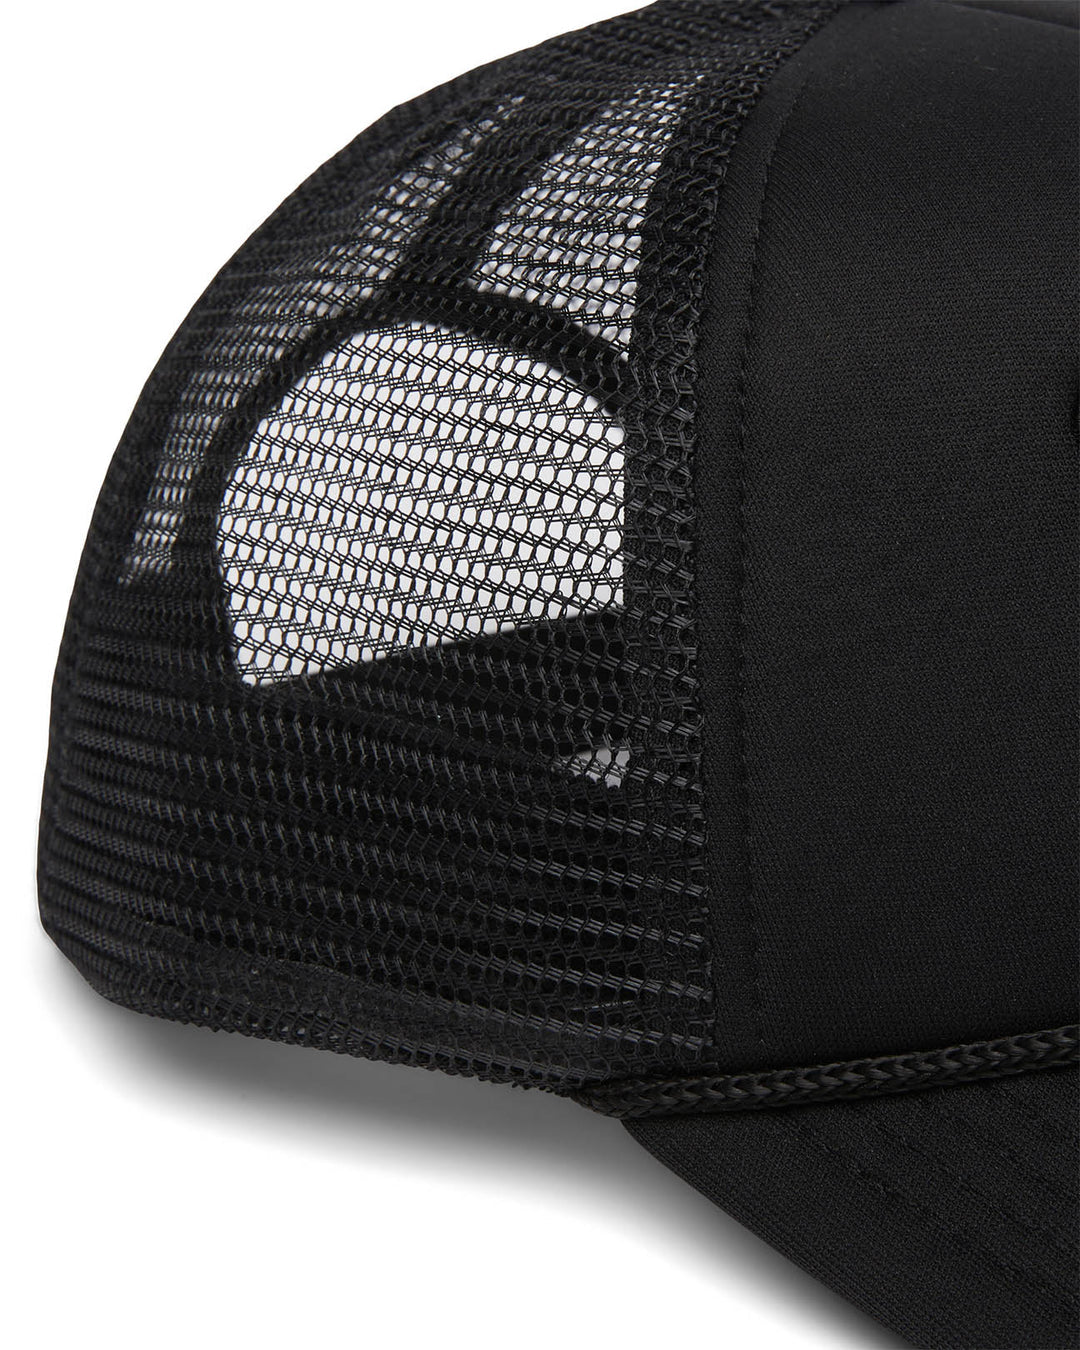 Close up view of mesh on hat.